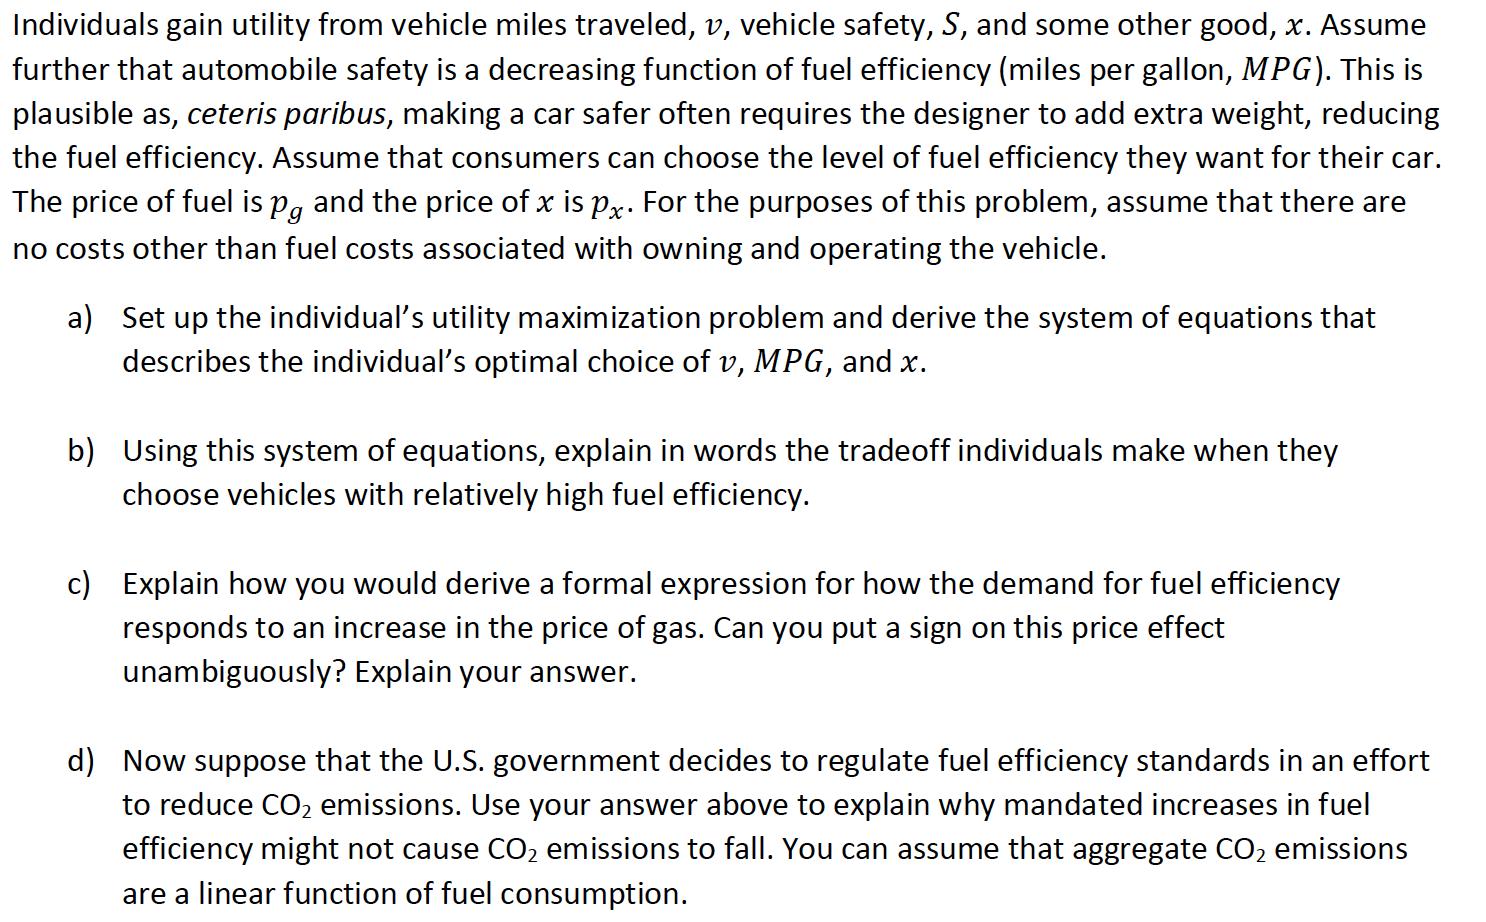 Individuals gain utility from vehicle miles traveled, ( v ), vehicle safety, ( S ), and some other good, ( x ). Assume